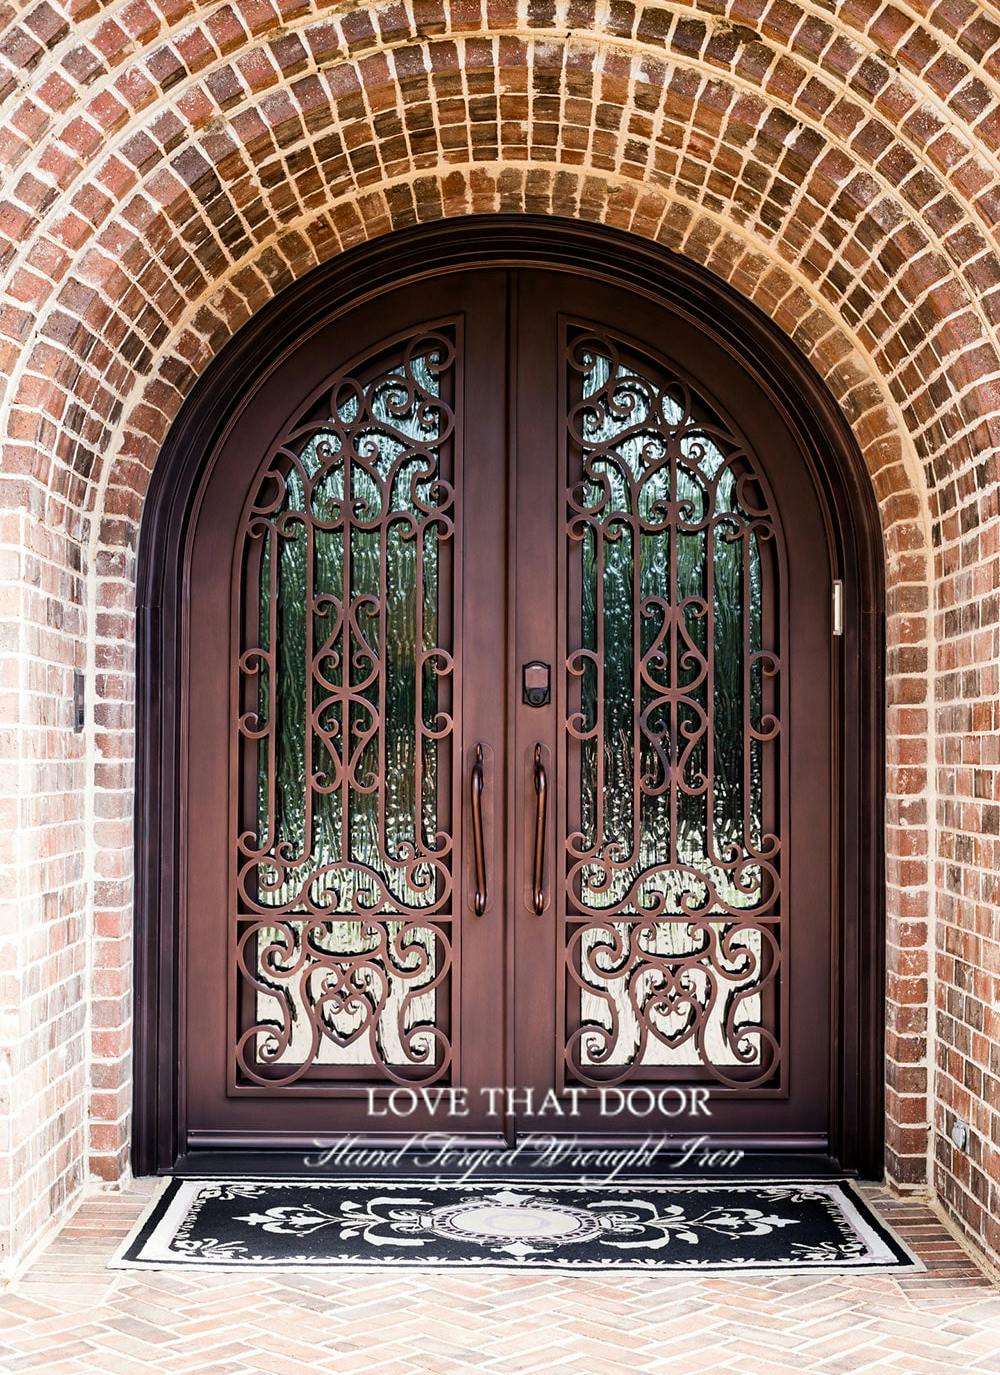 Stylish iron double doors with intricate metalwork and glass panels